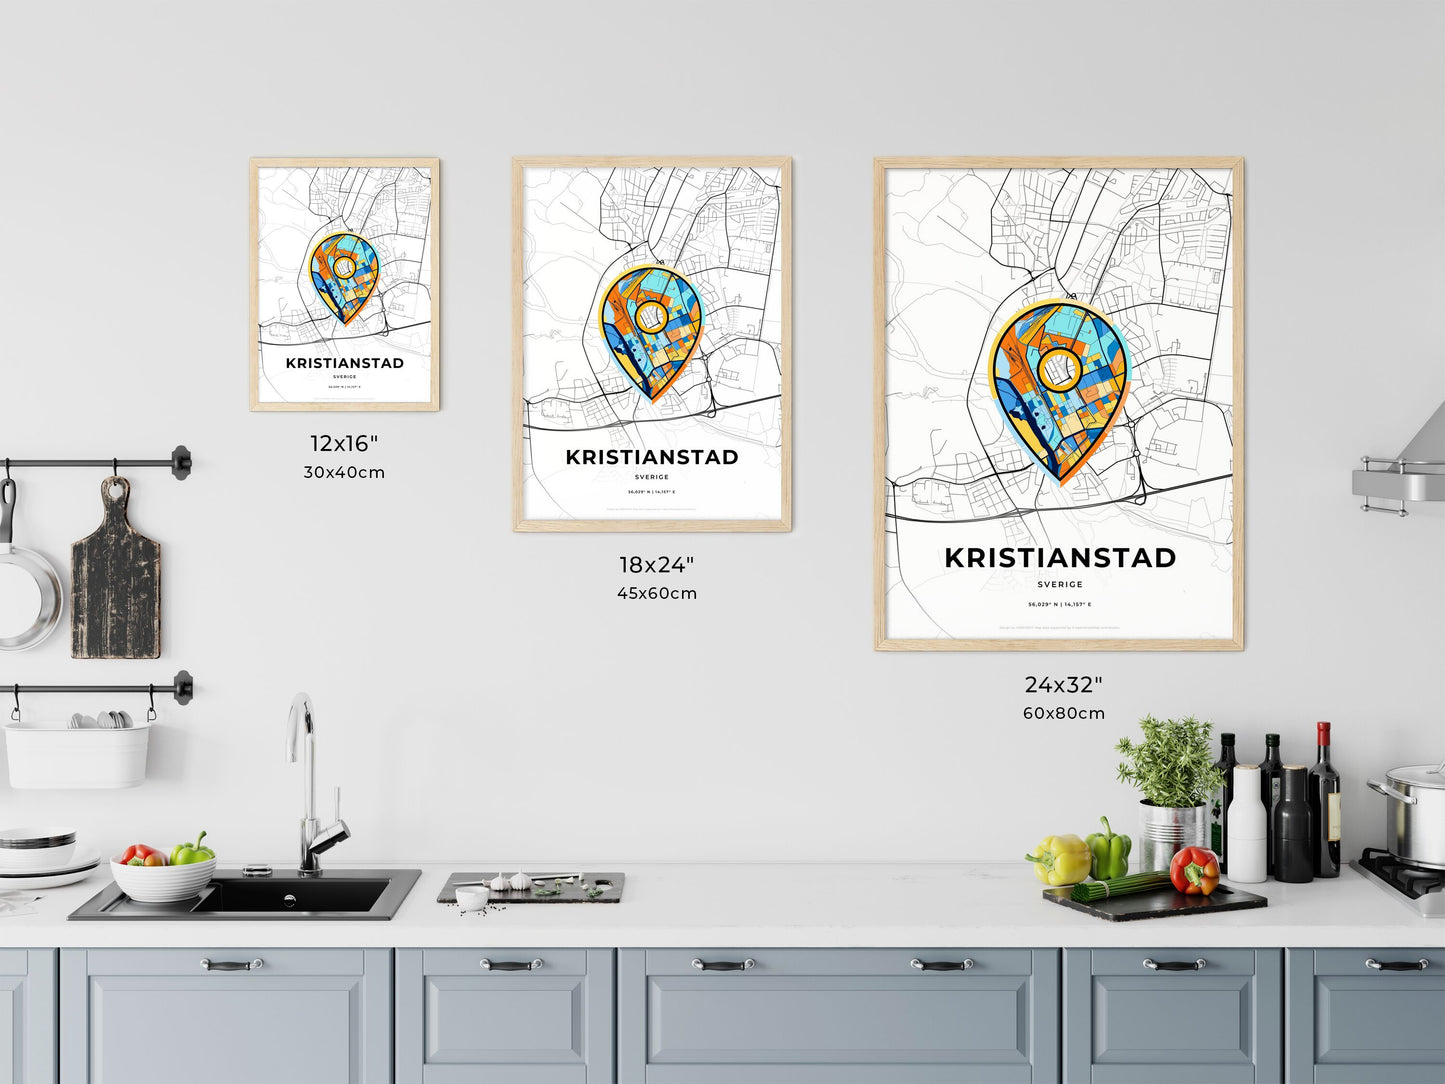 KRISTIANSTAD SWEDEN minimal art map with a colorful icon. Where it all began, Couple map gift.